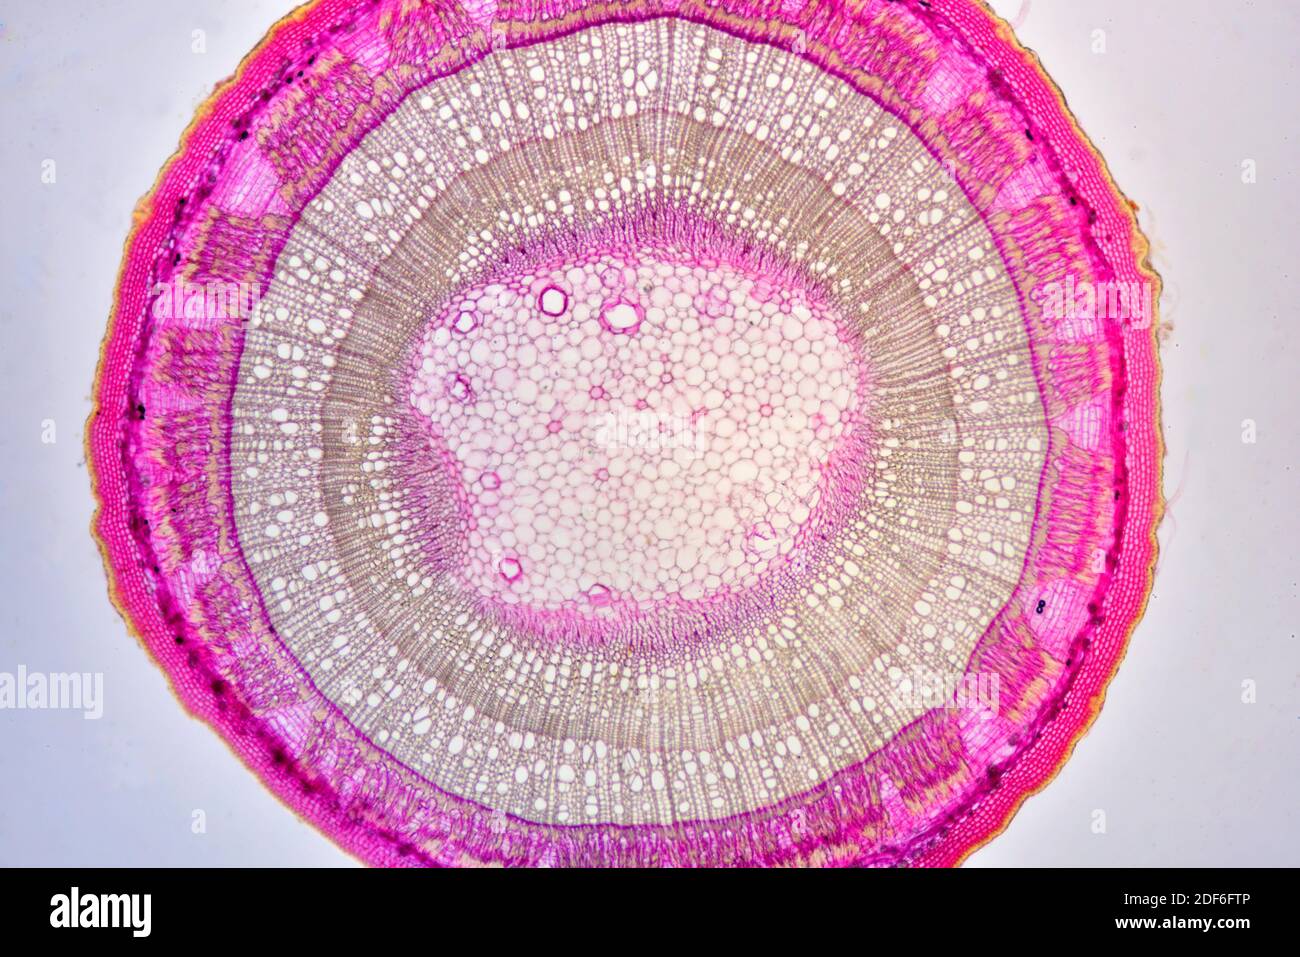 Eudicot stem of Tilia sp. showing annual growth rings (spring and summer), cuticle, epidermis, collenchyma, cortex, parenchyma, pith, phloem and Stock Photo